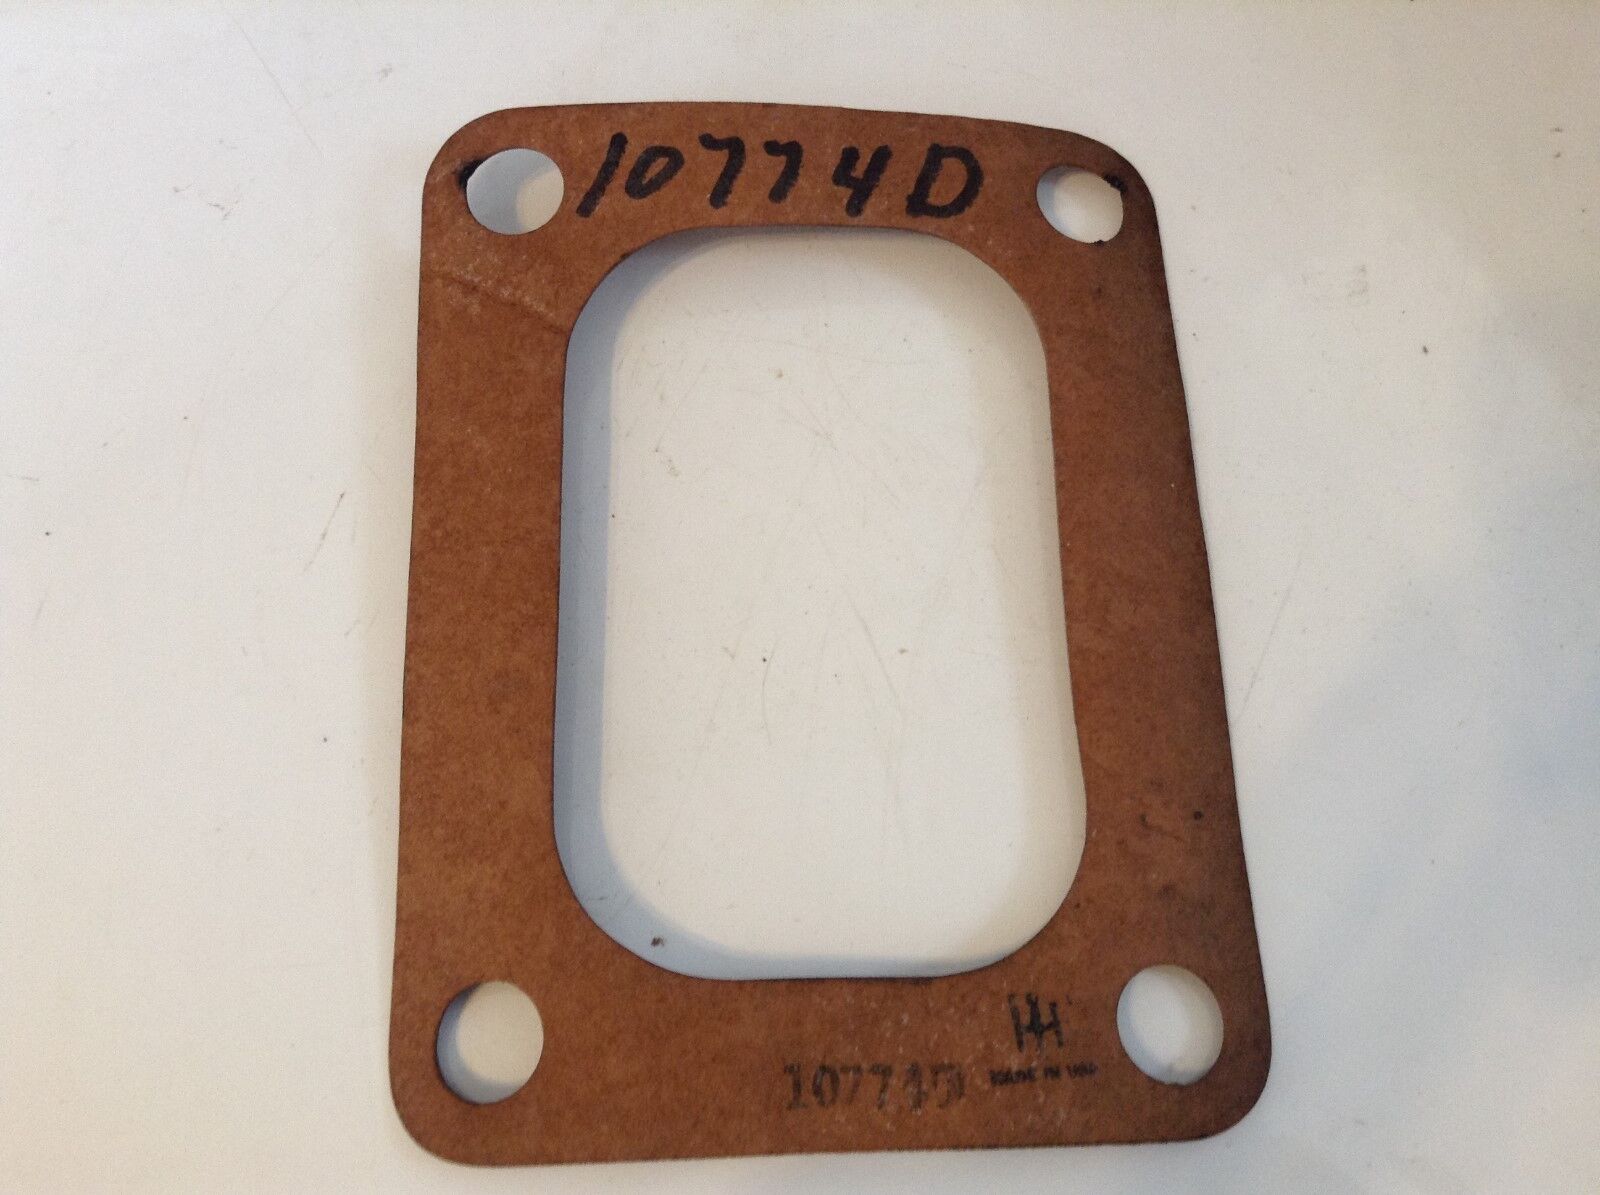 10774D - Is A New Radiator Inlet Gasket For A McCormick Deering 10-20 Tractors.